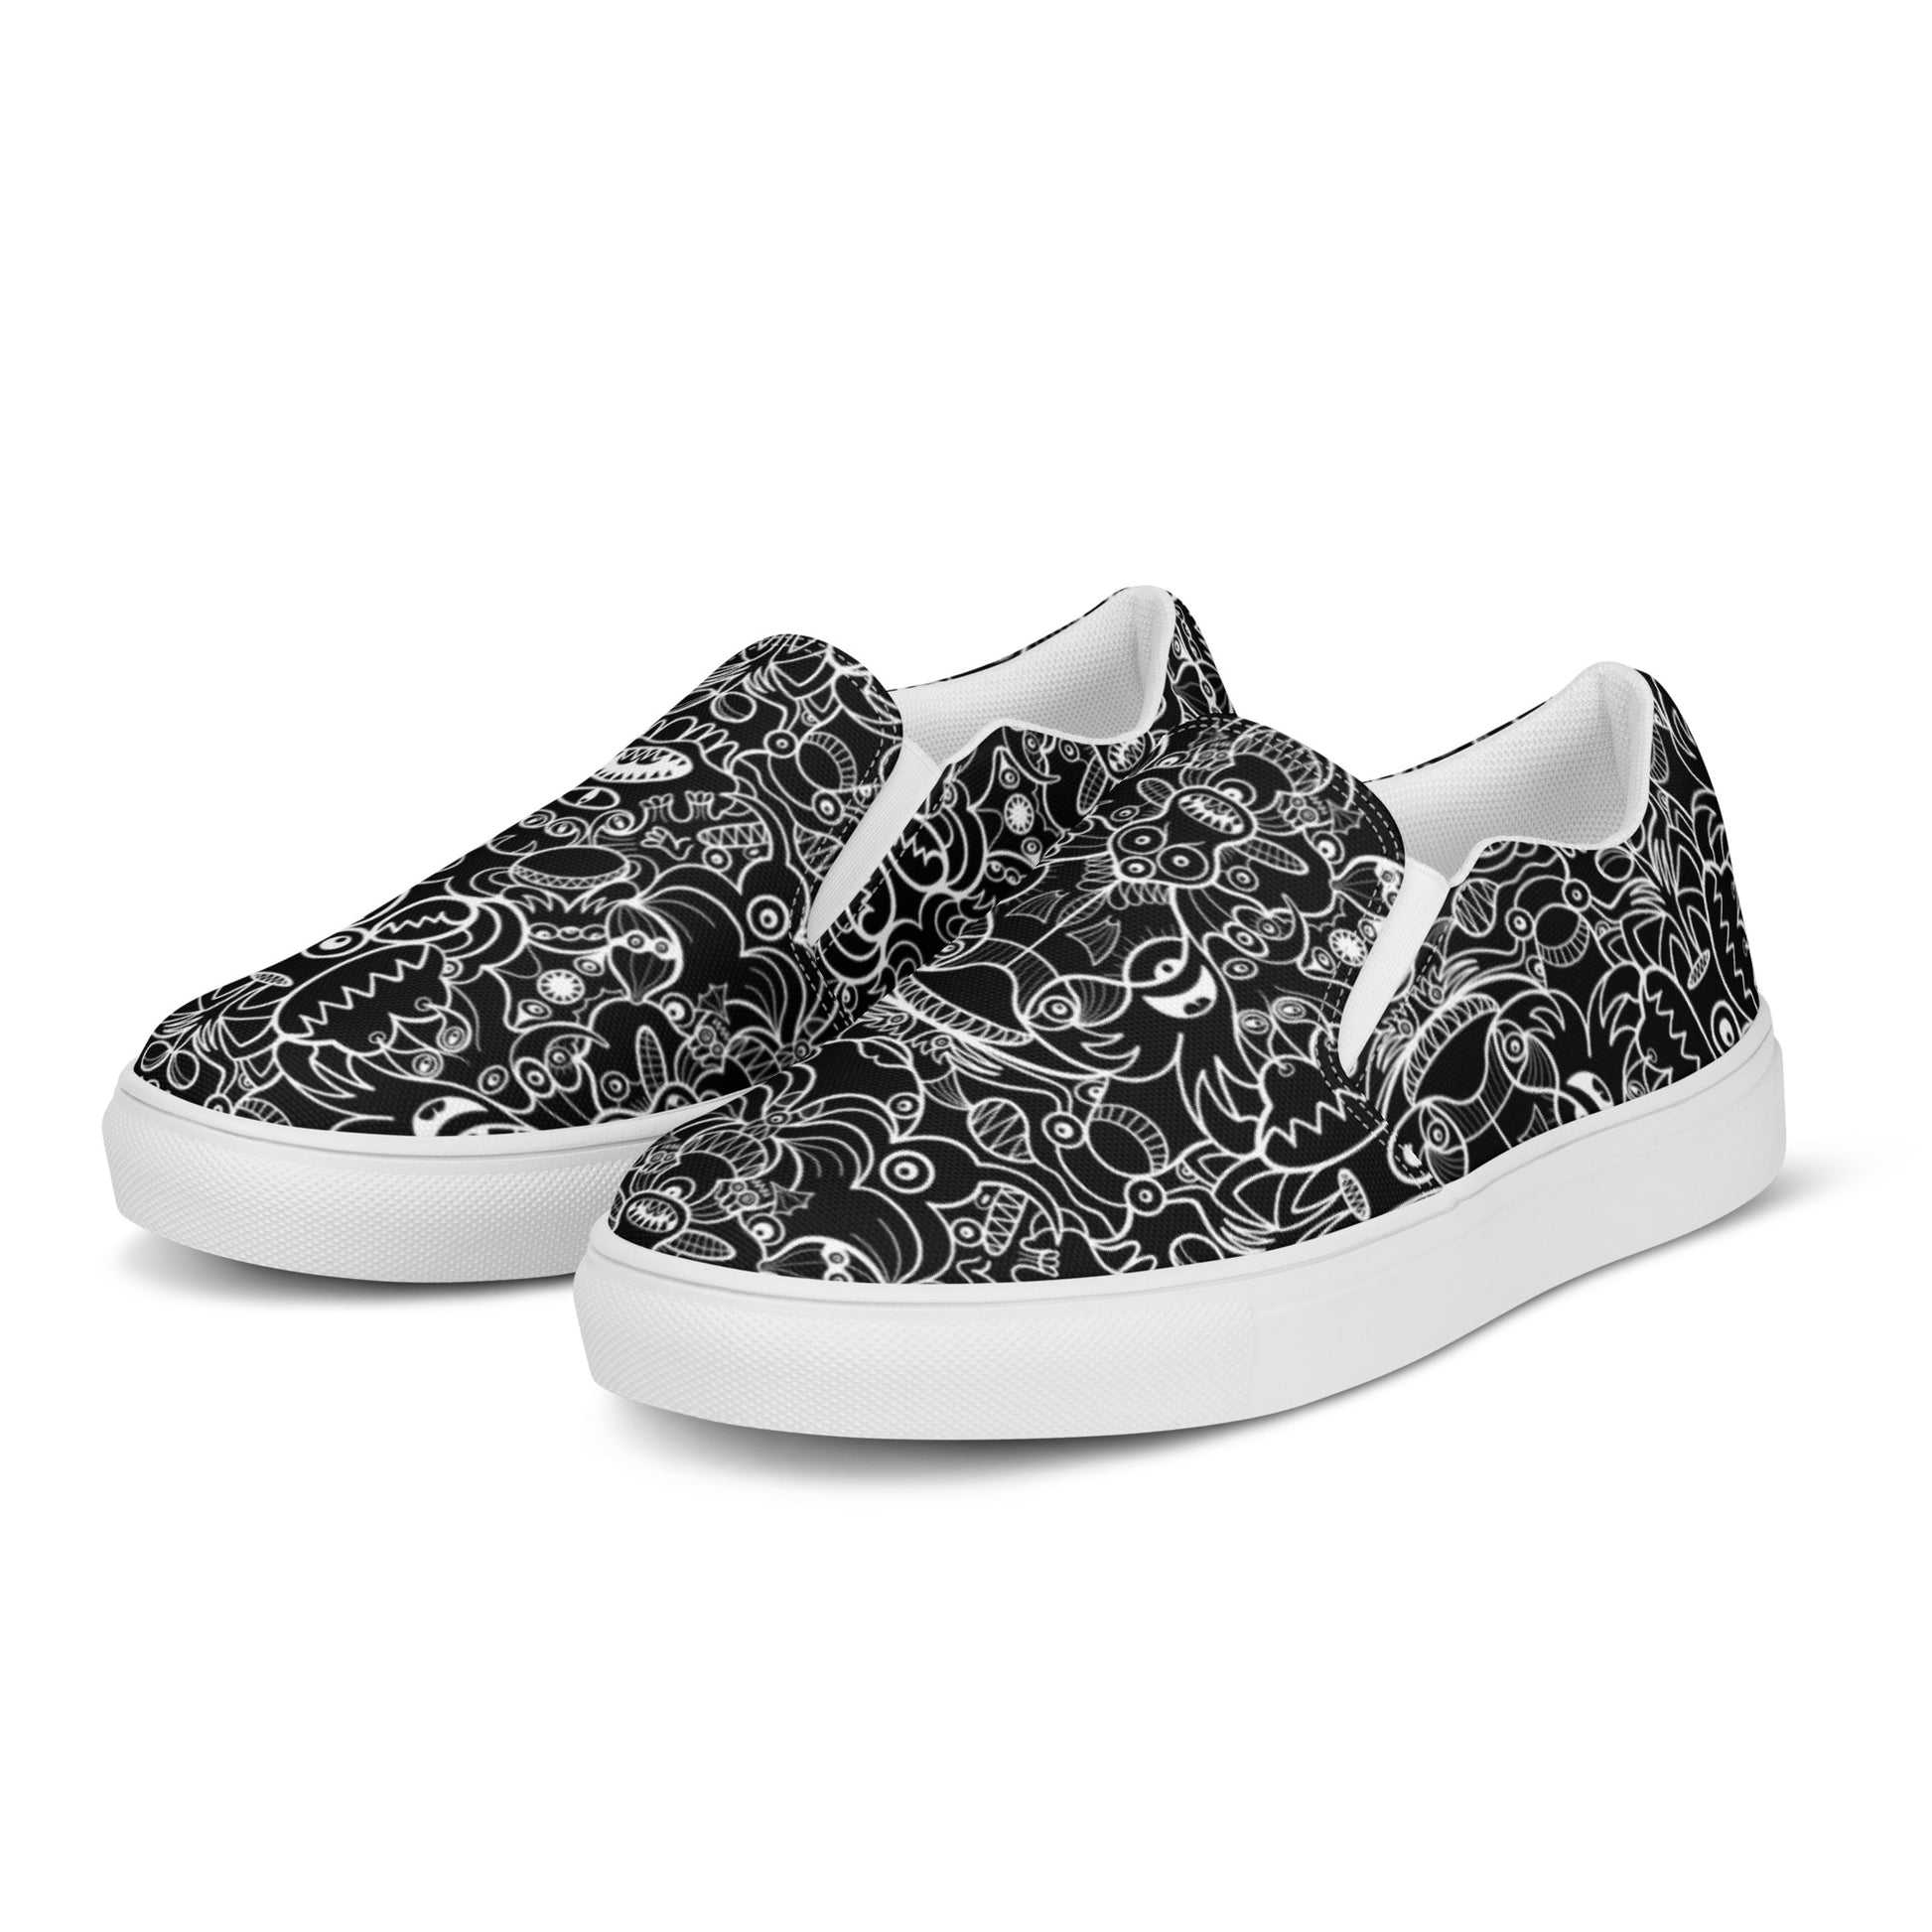 The powerful dark side of the Doodle world Men’s slip-on canvas shoes. Overview